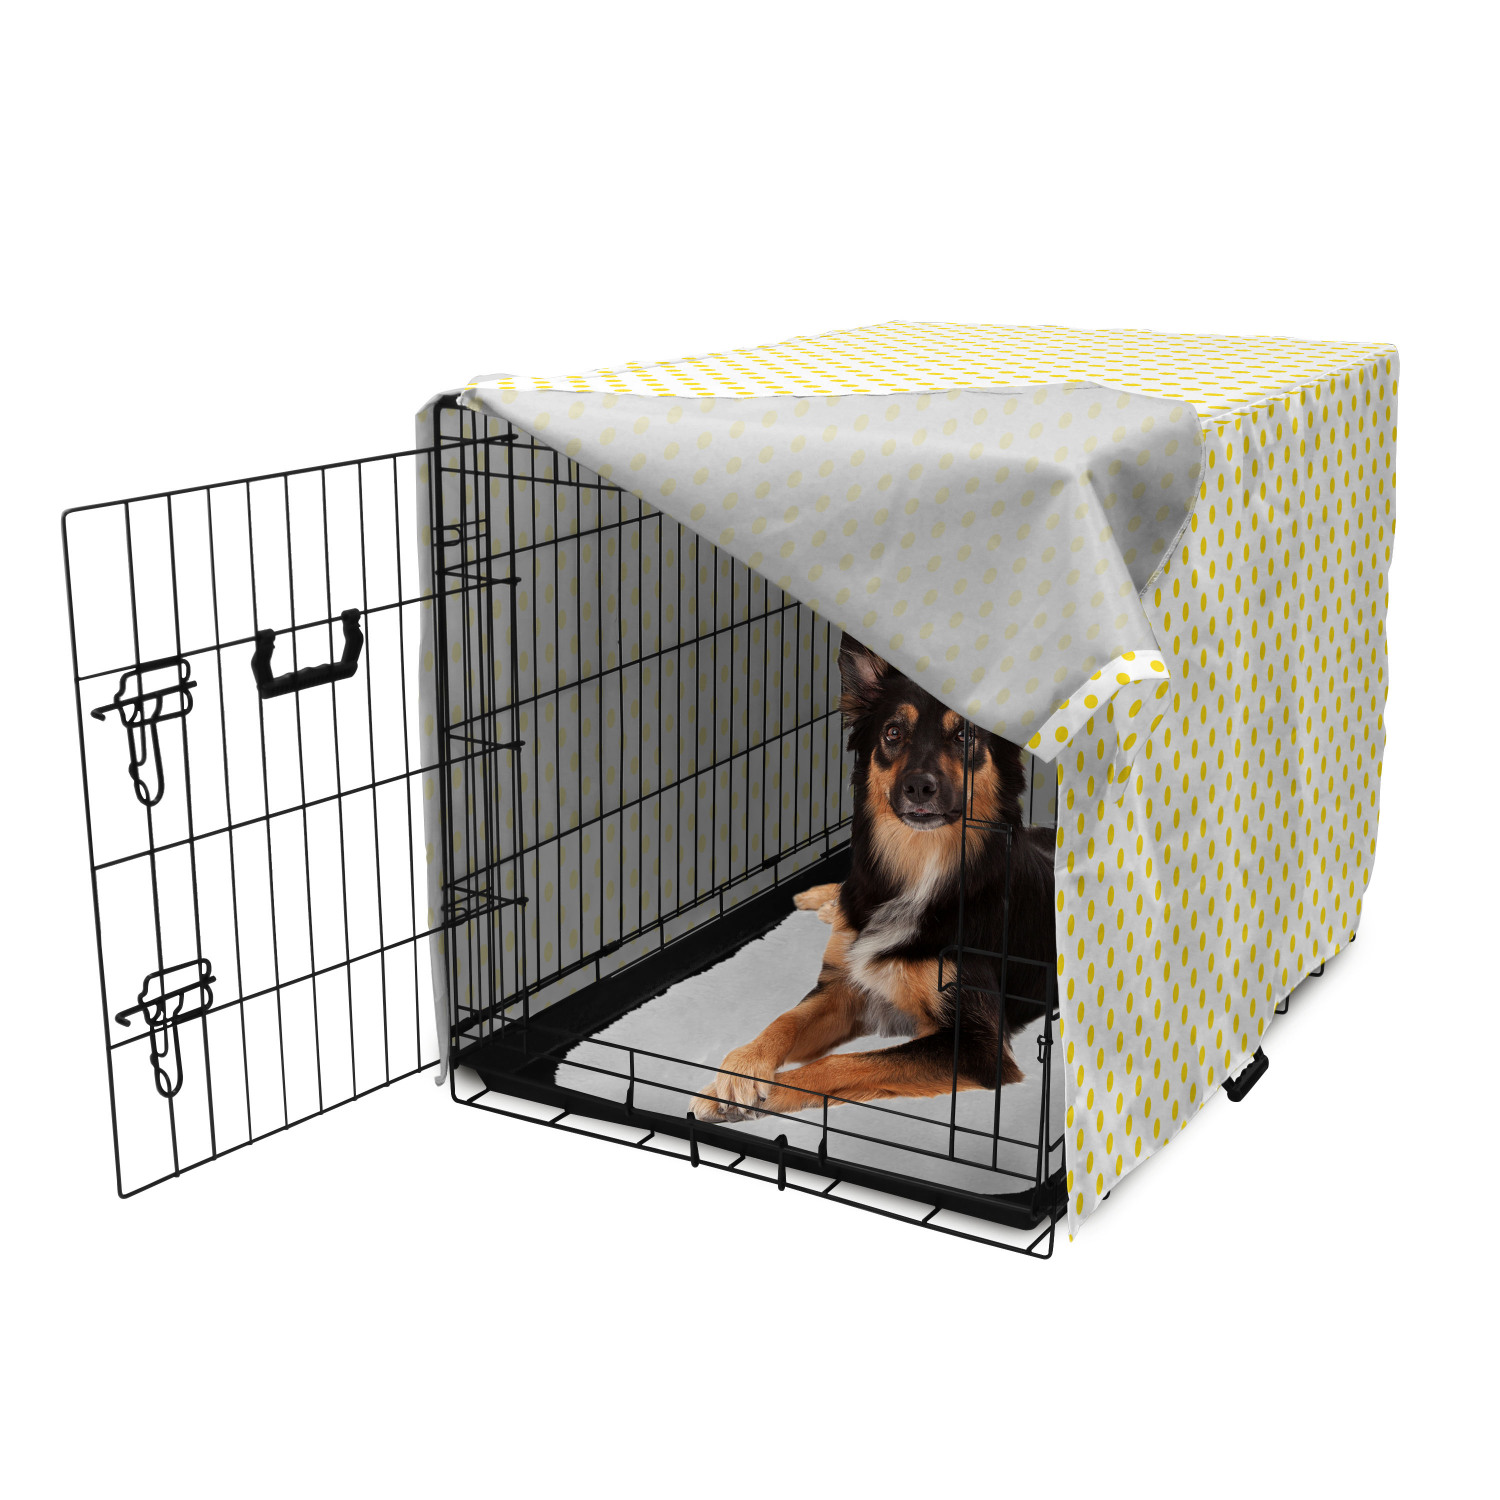 Yellow Dog Crate Cover, Picnic Like 50s 60s 70s Retro Themed Yellow Spotted White Pattern Print, Easy to Use Pet Kennel Cover for Medium Large Dogs, 35" x 23" x 27", Yellow and White, by Ambesonne - image 2 of 6